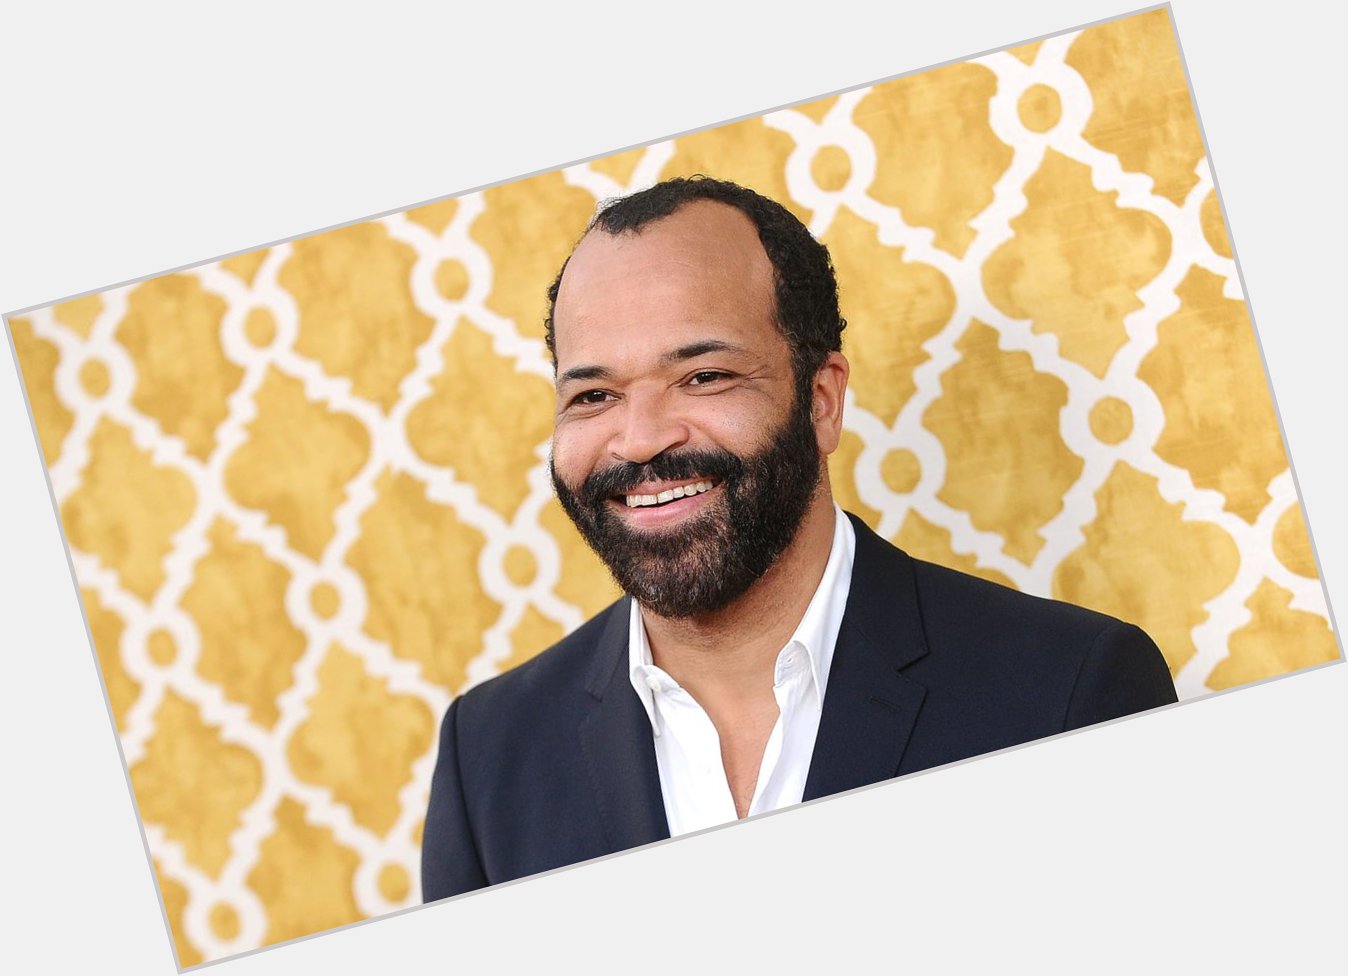 A very happy 55th birthday to Emmy, Tony, and Golden Globe winner Jeffrey Wright, born in D.C. on 12/7/65! 